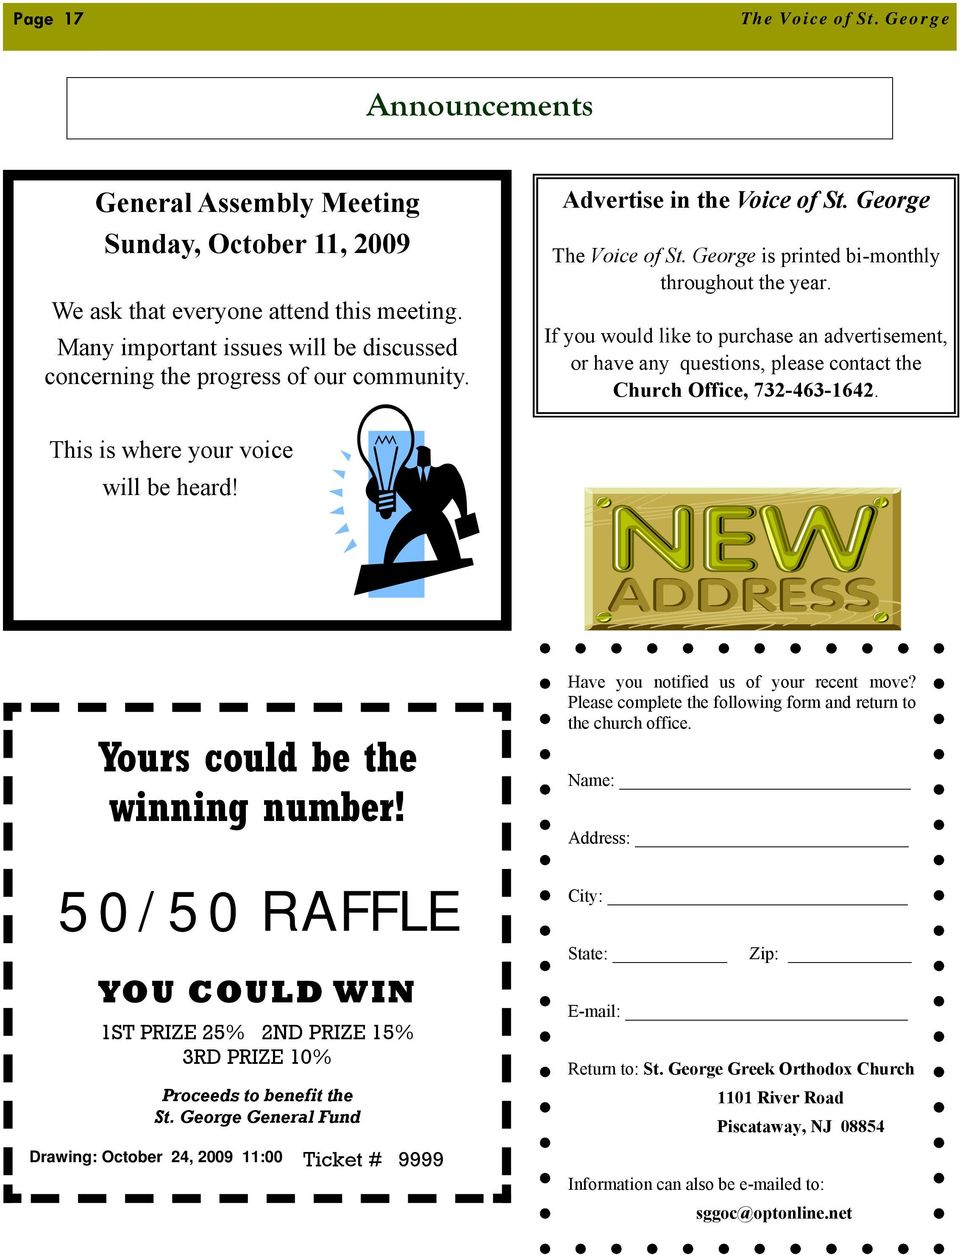 If you would like to purchase an advertisement, or have any questions, please contact the Church Office, 732-463-1642. This is where your voice will be heard! Yours could be the winning number!